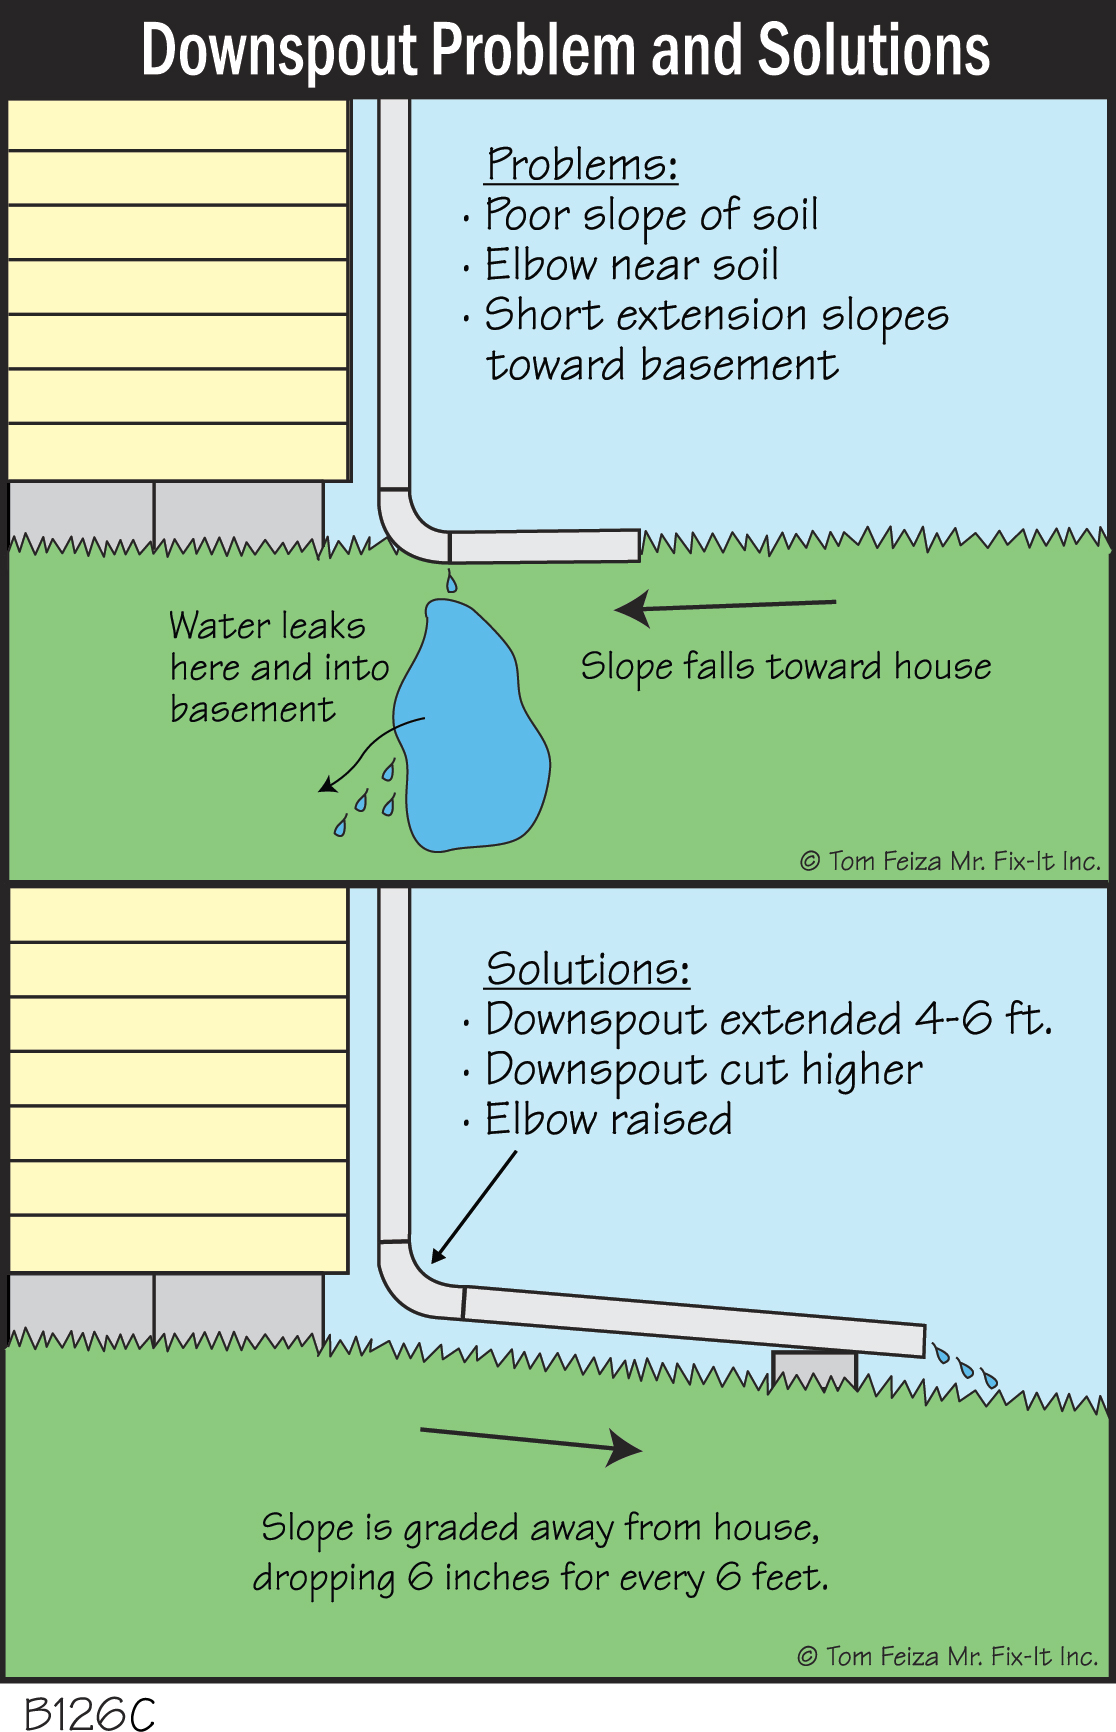 B126C - Downspout Problem and Solutions